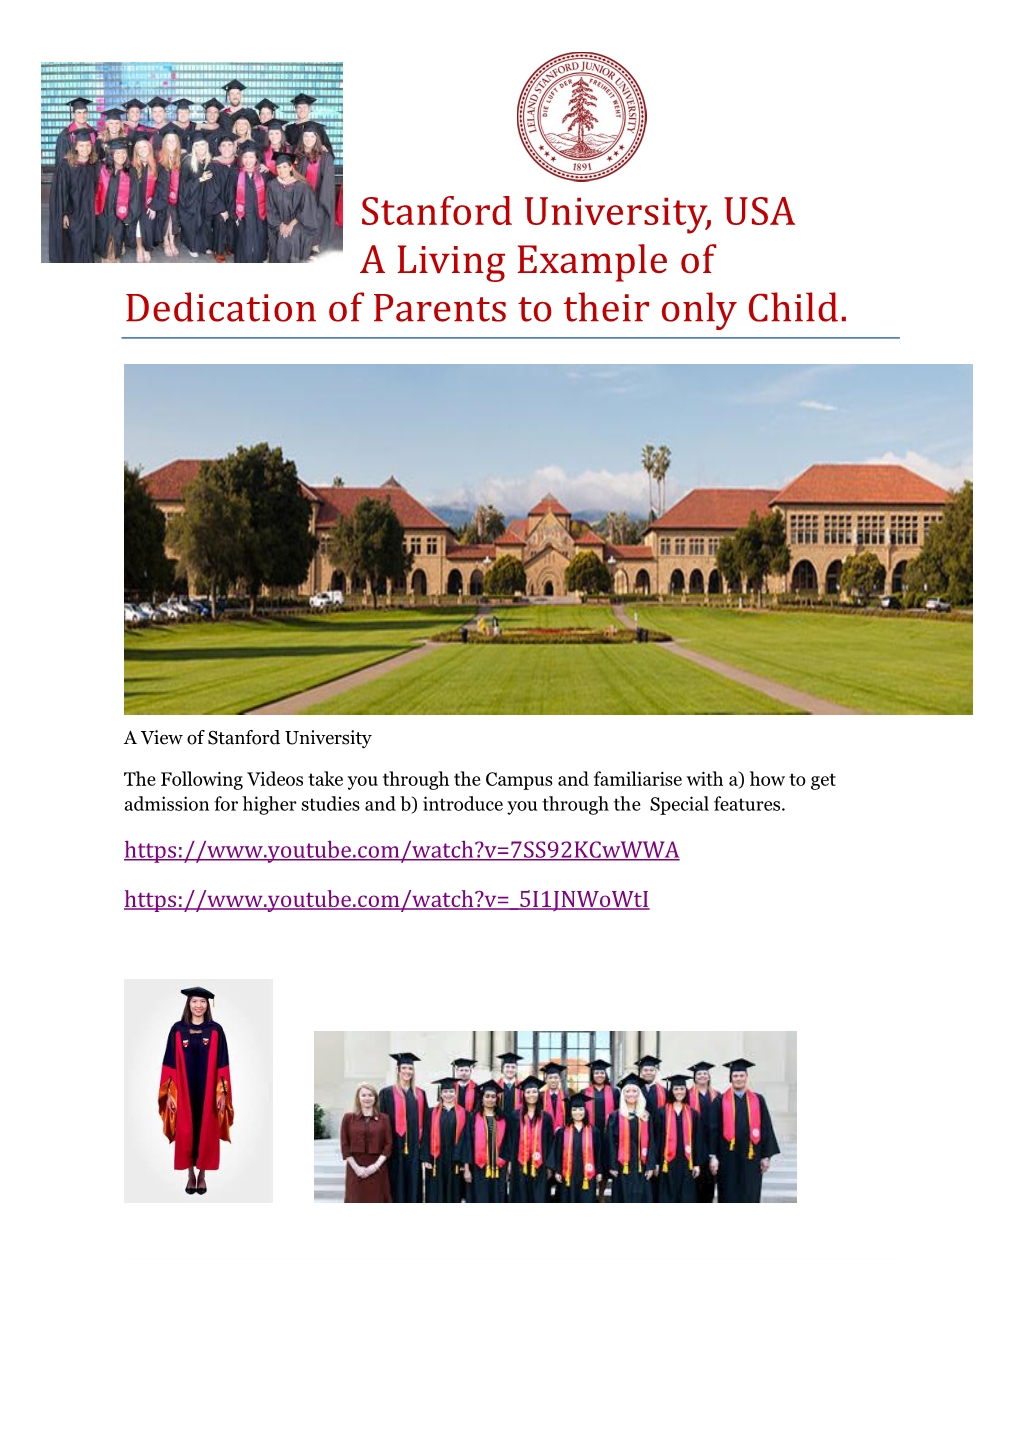 Stanford University, USA a Living Example of Dedication of Parents to Their Only Child